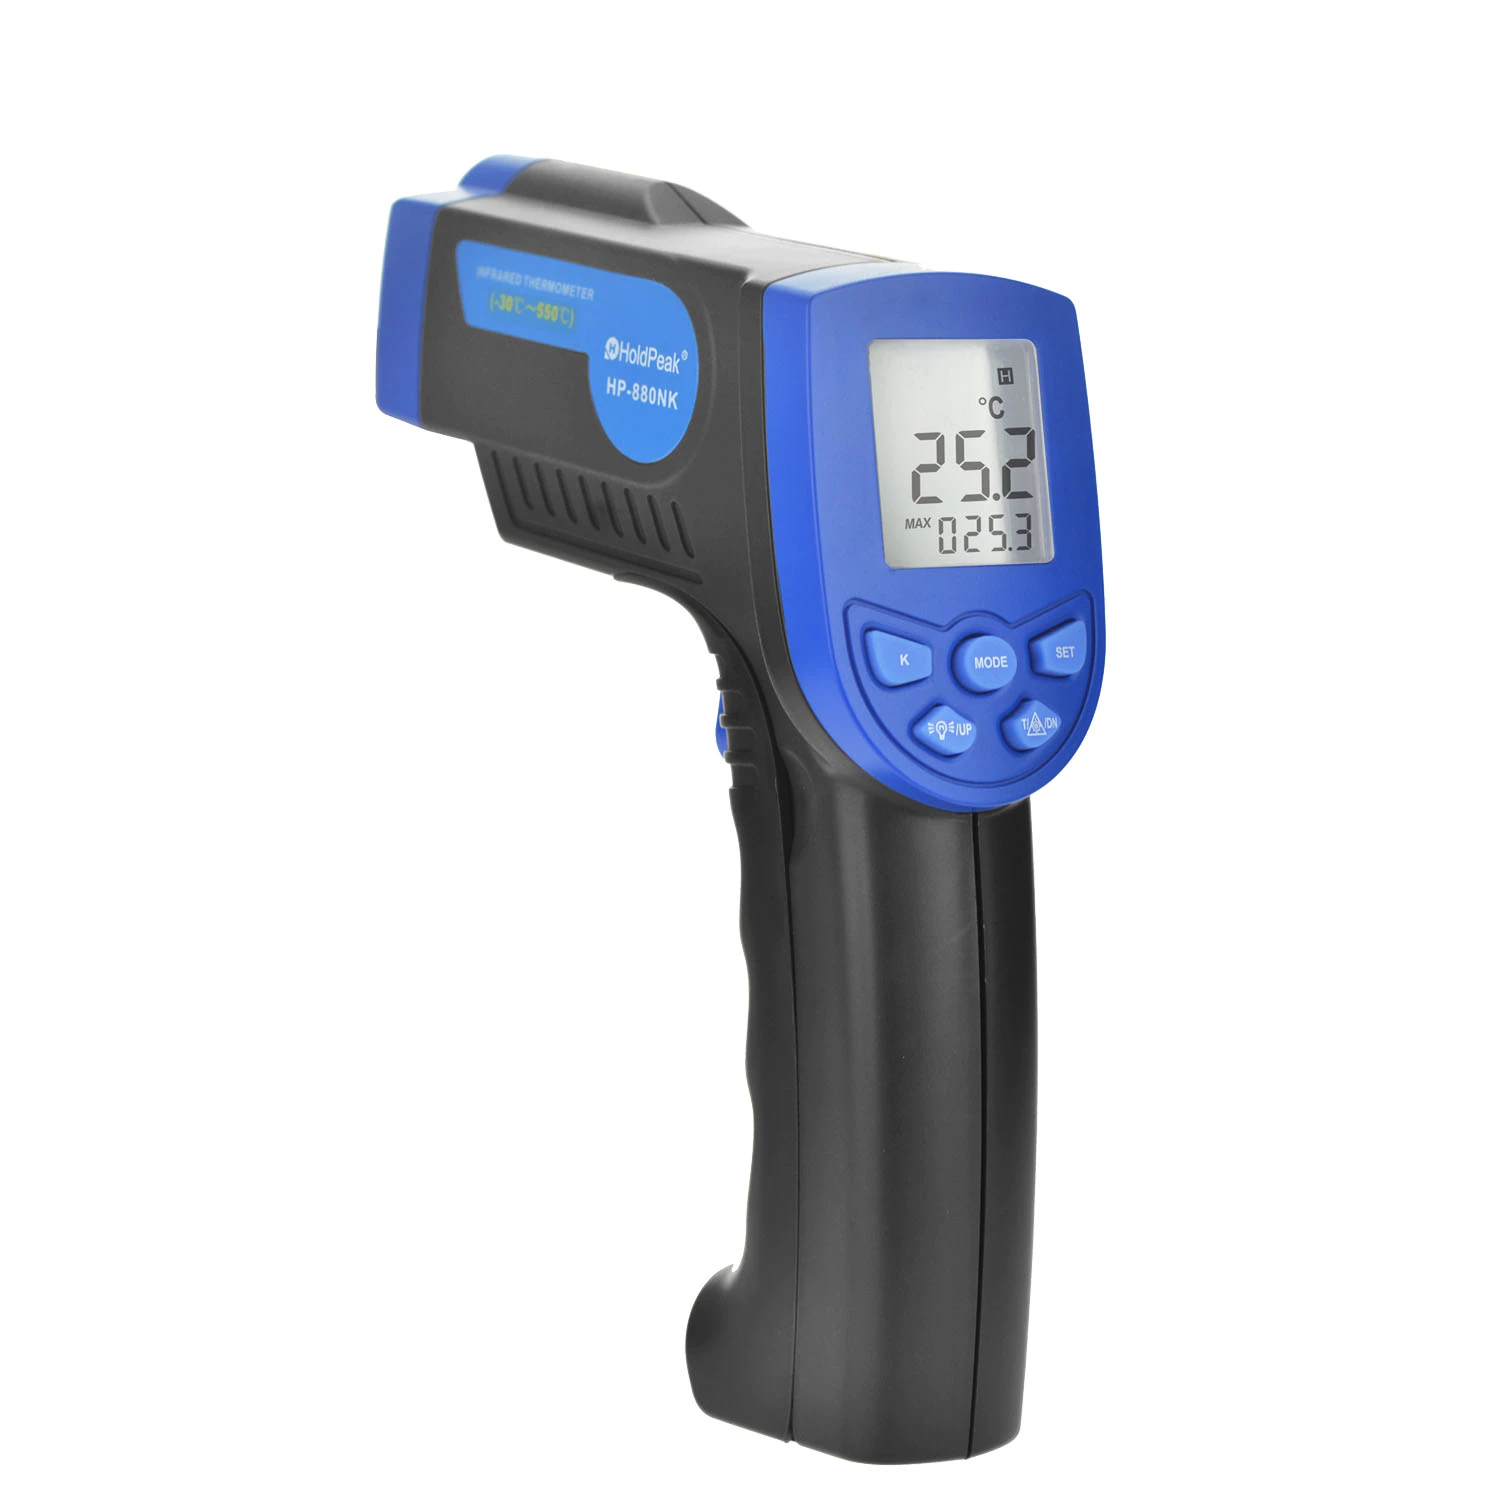 digital infrared thermometer low price smart sensor infrared thermometer HP-880NK